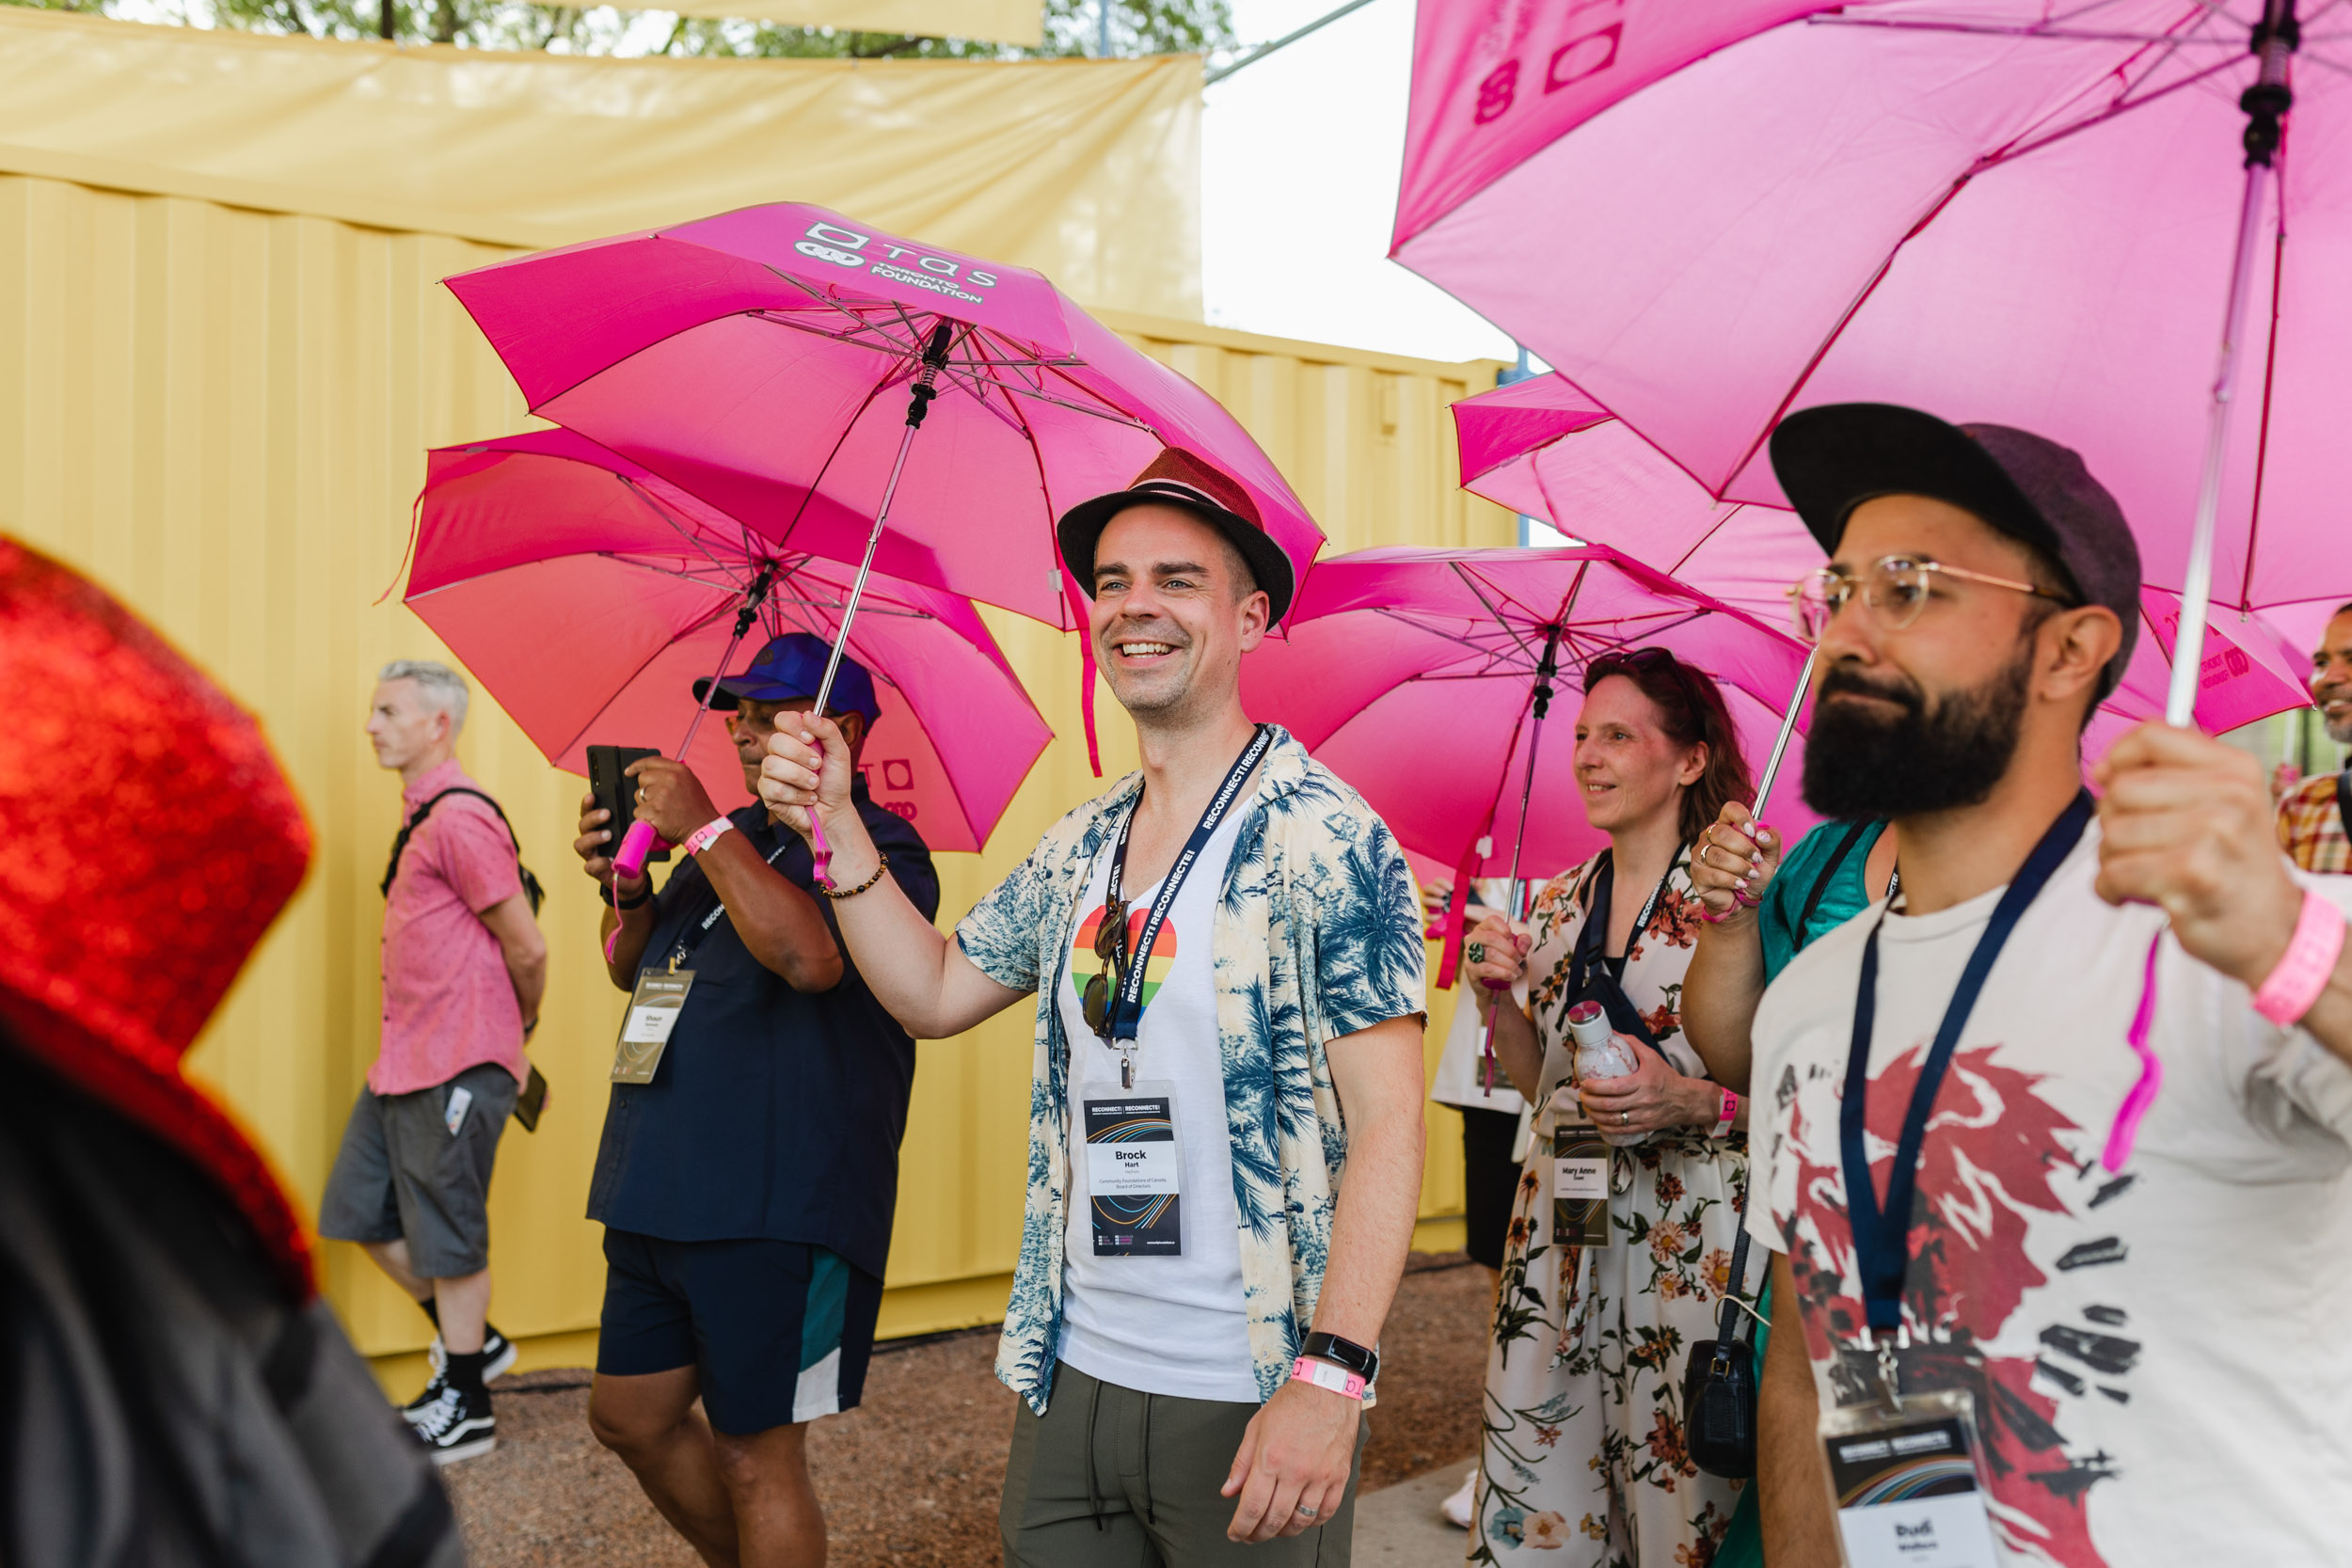 Conference attendees holding pink umbrellas.